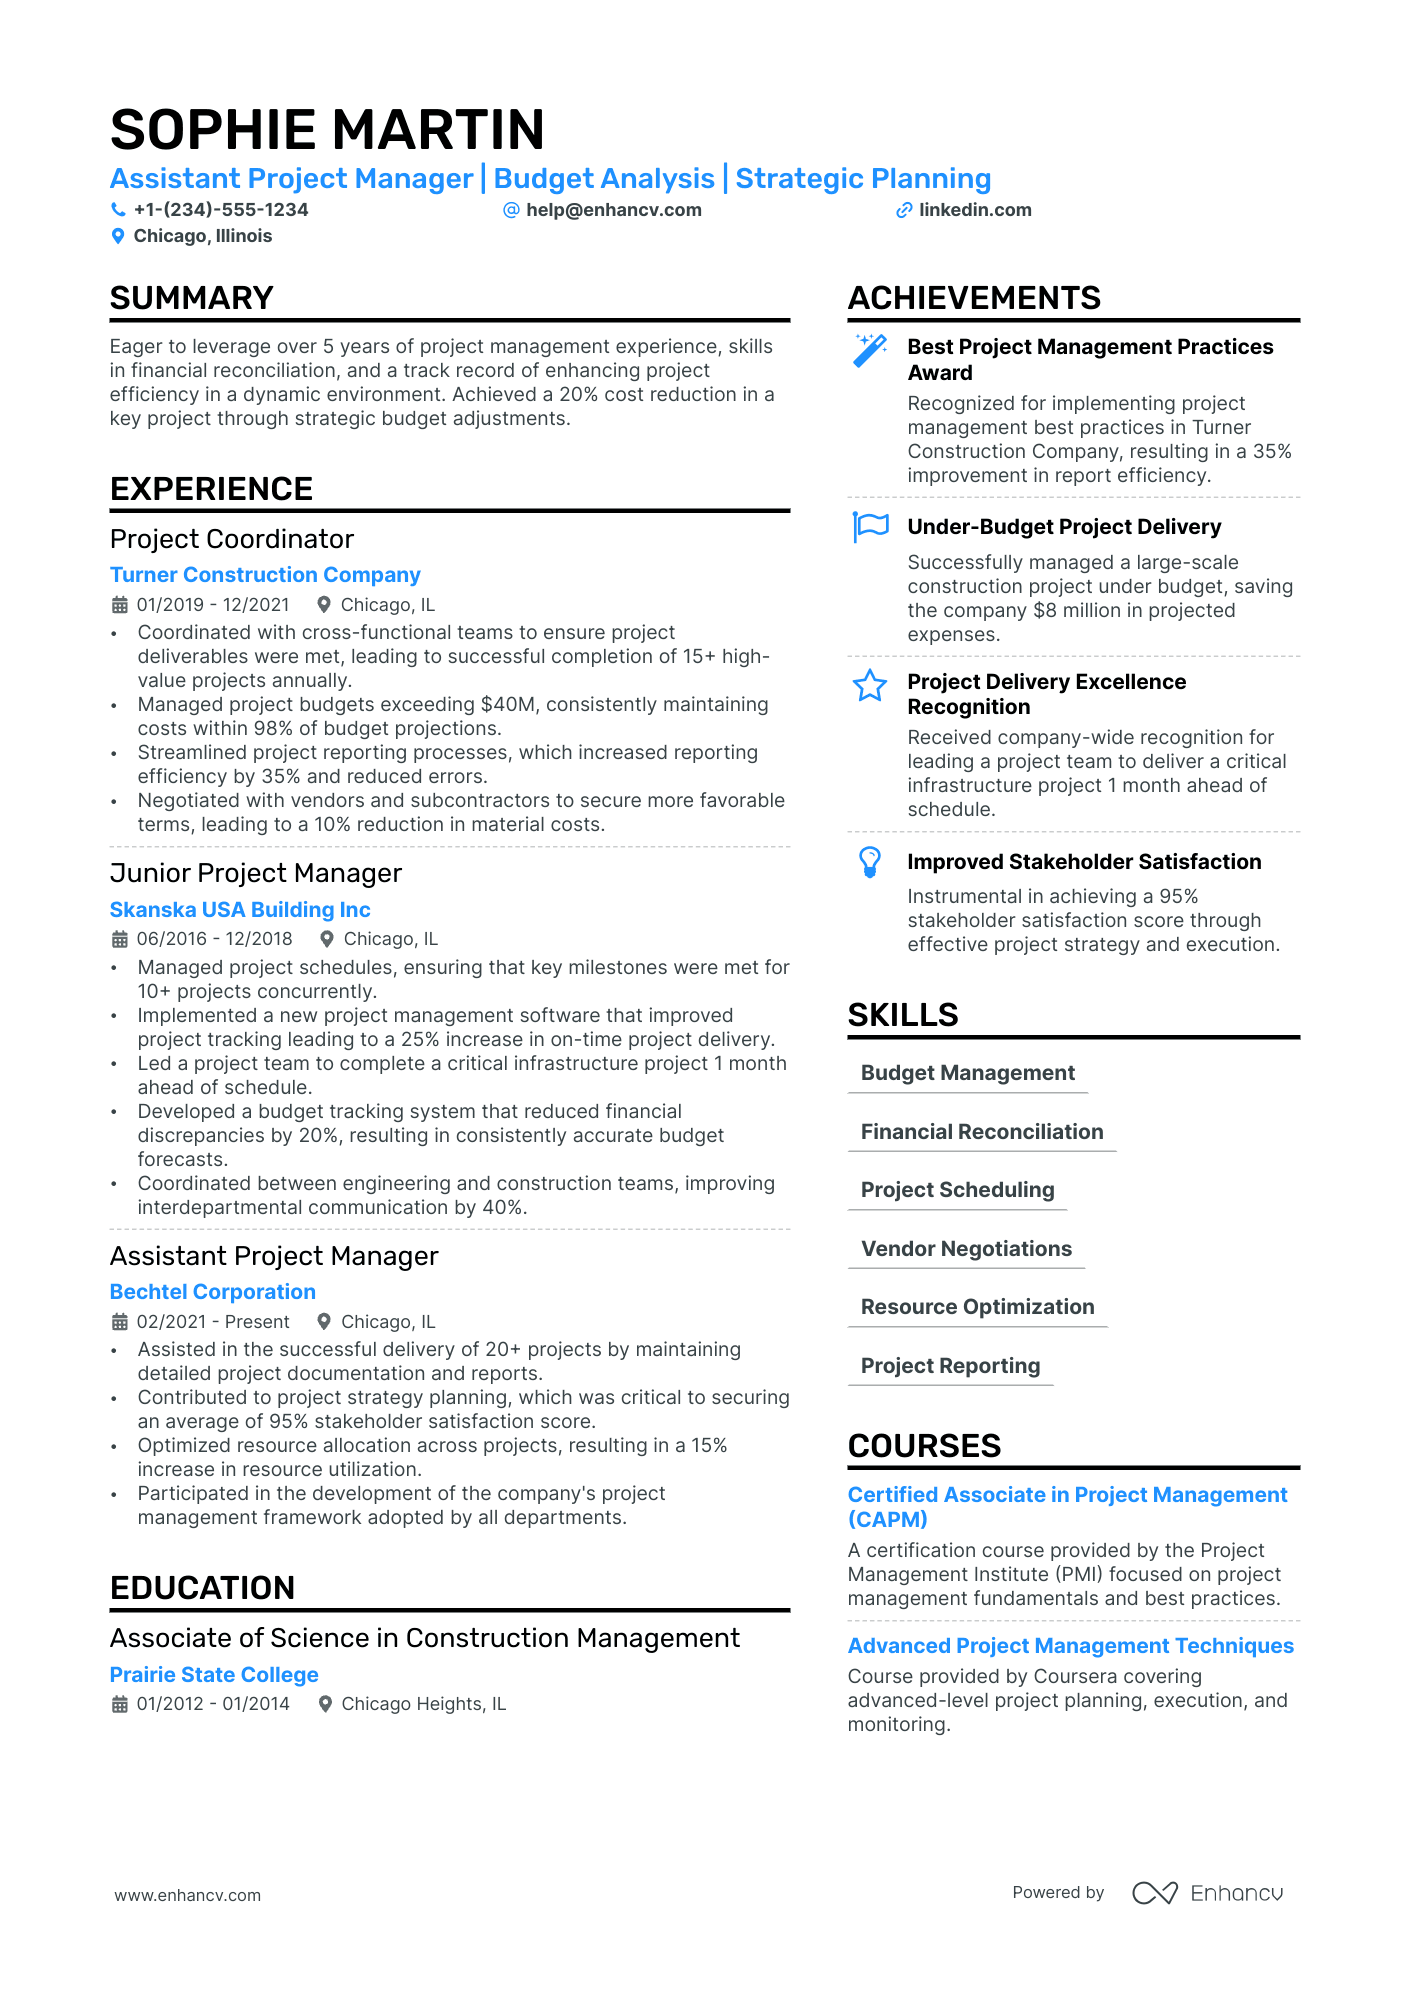 Assistant Project Manager resume example